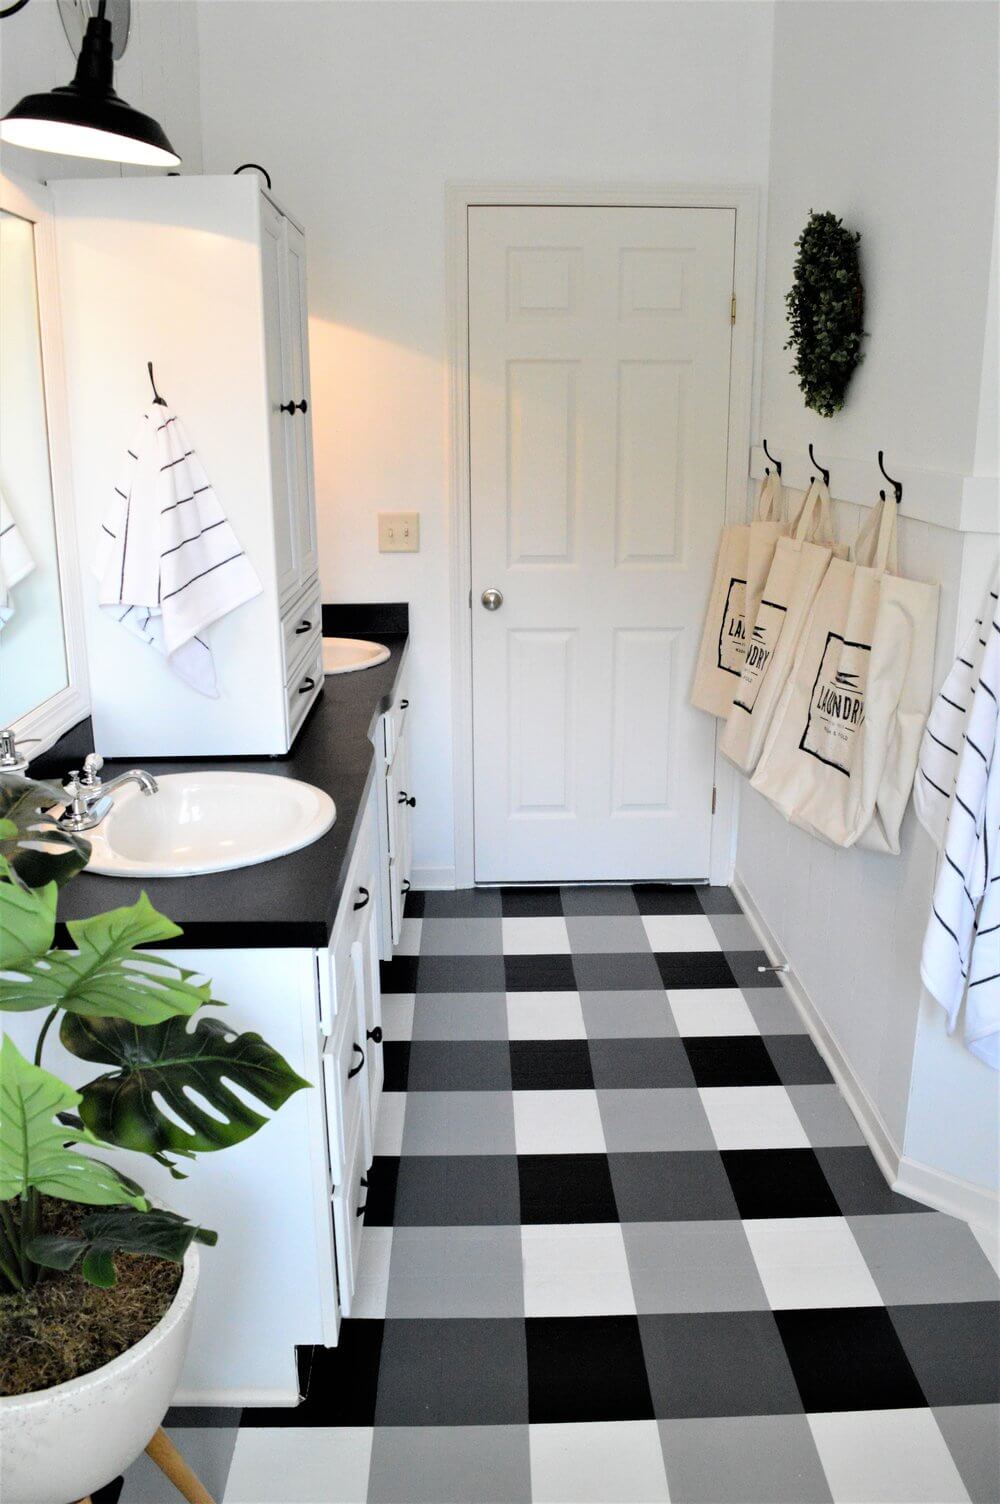 Black, White, and Plaid All Over the Bathroom Floor